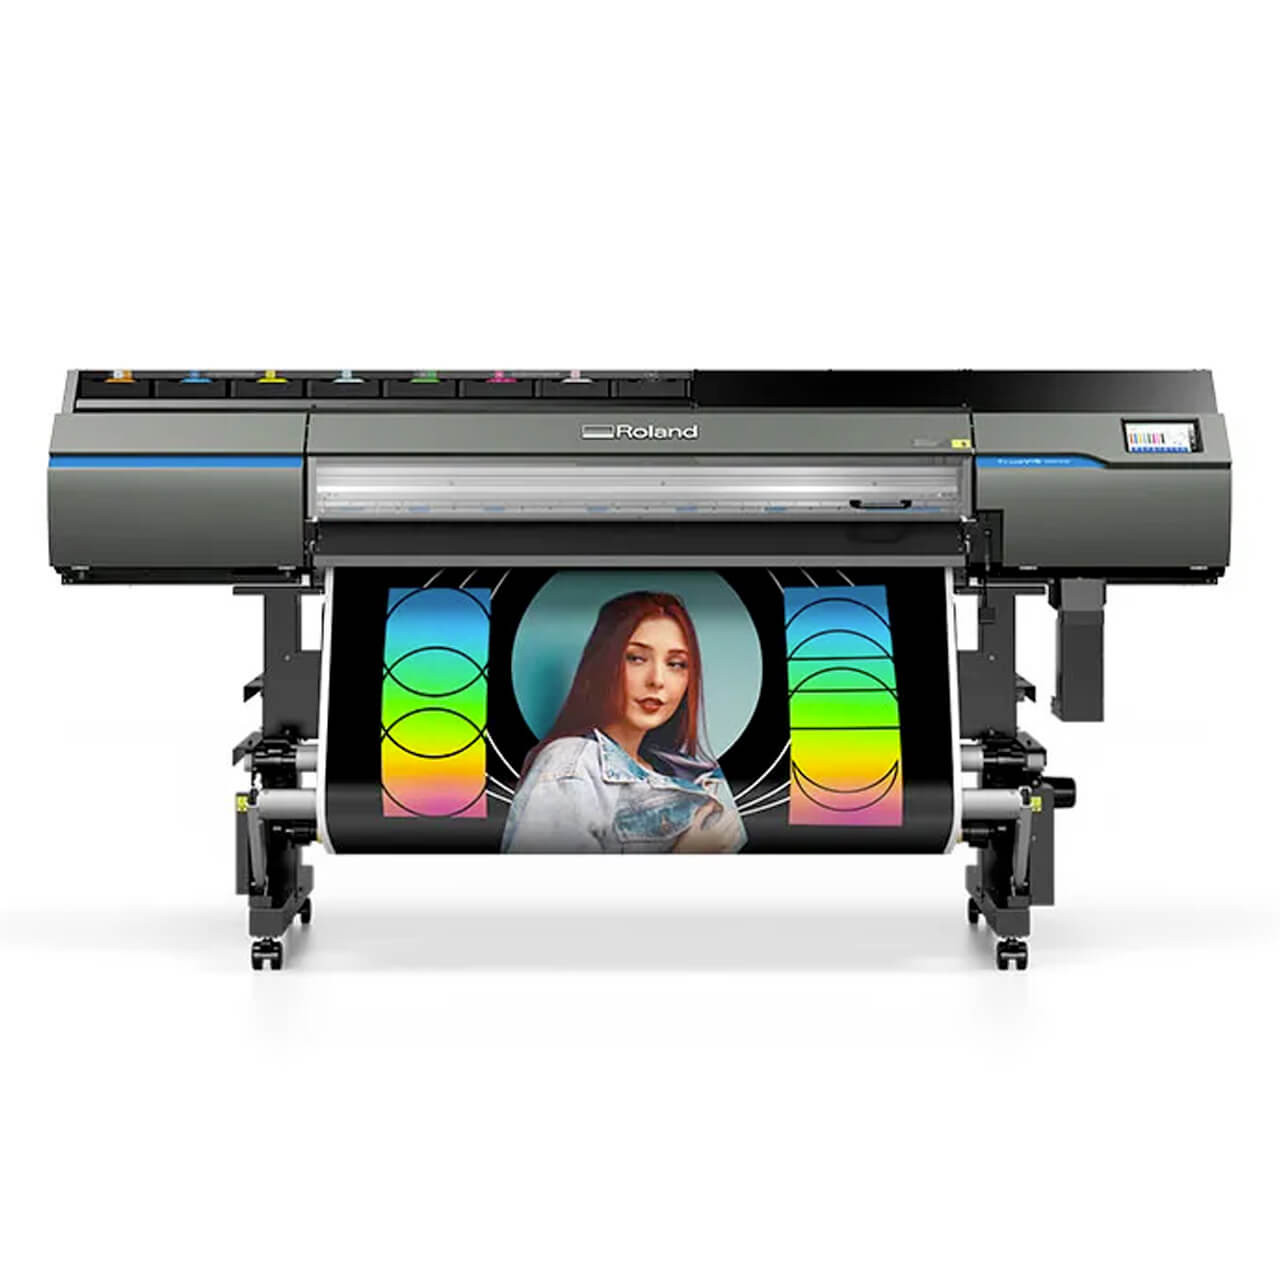 Roland Holographic Prism Film w/ Adhesive 15 x 25yd